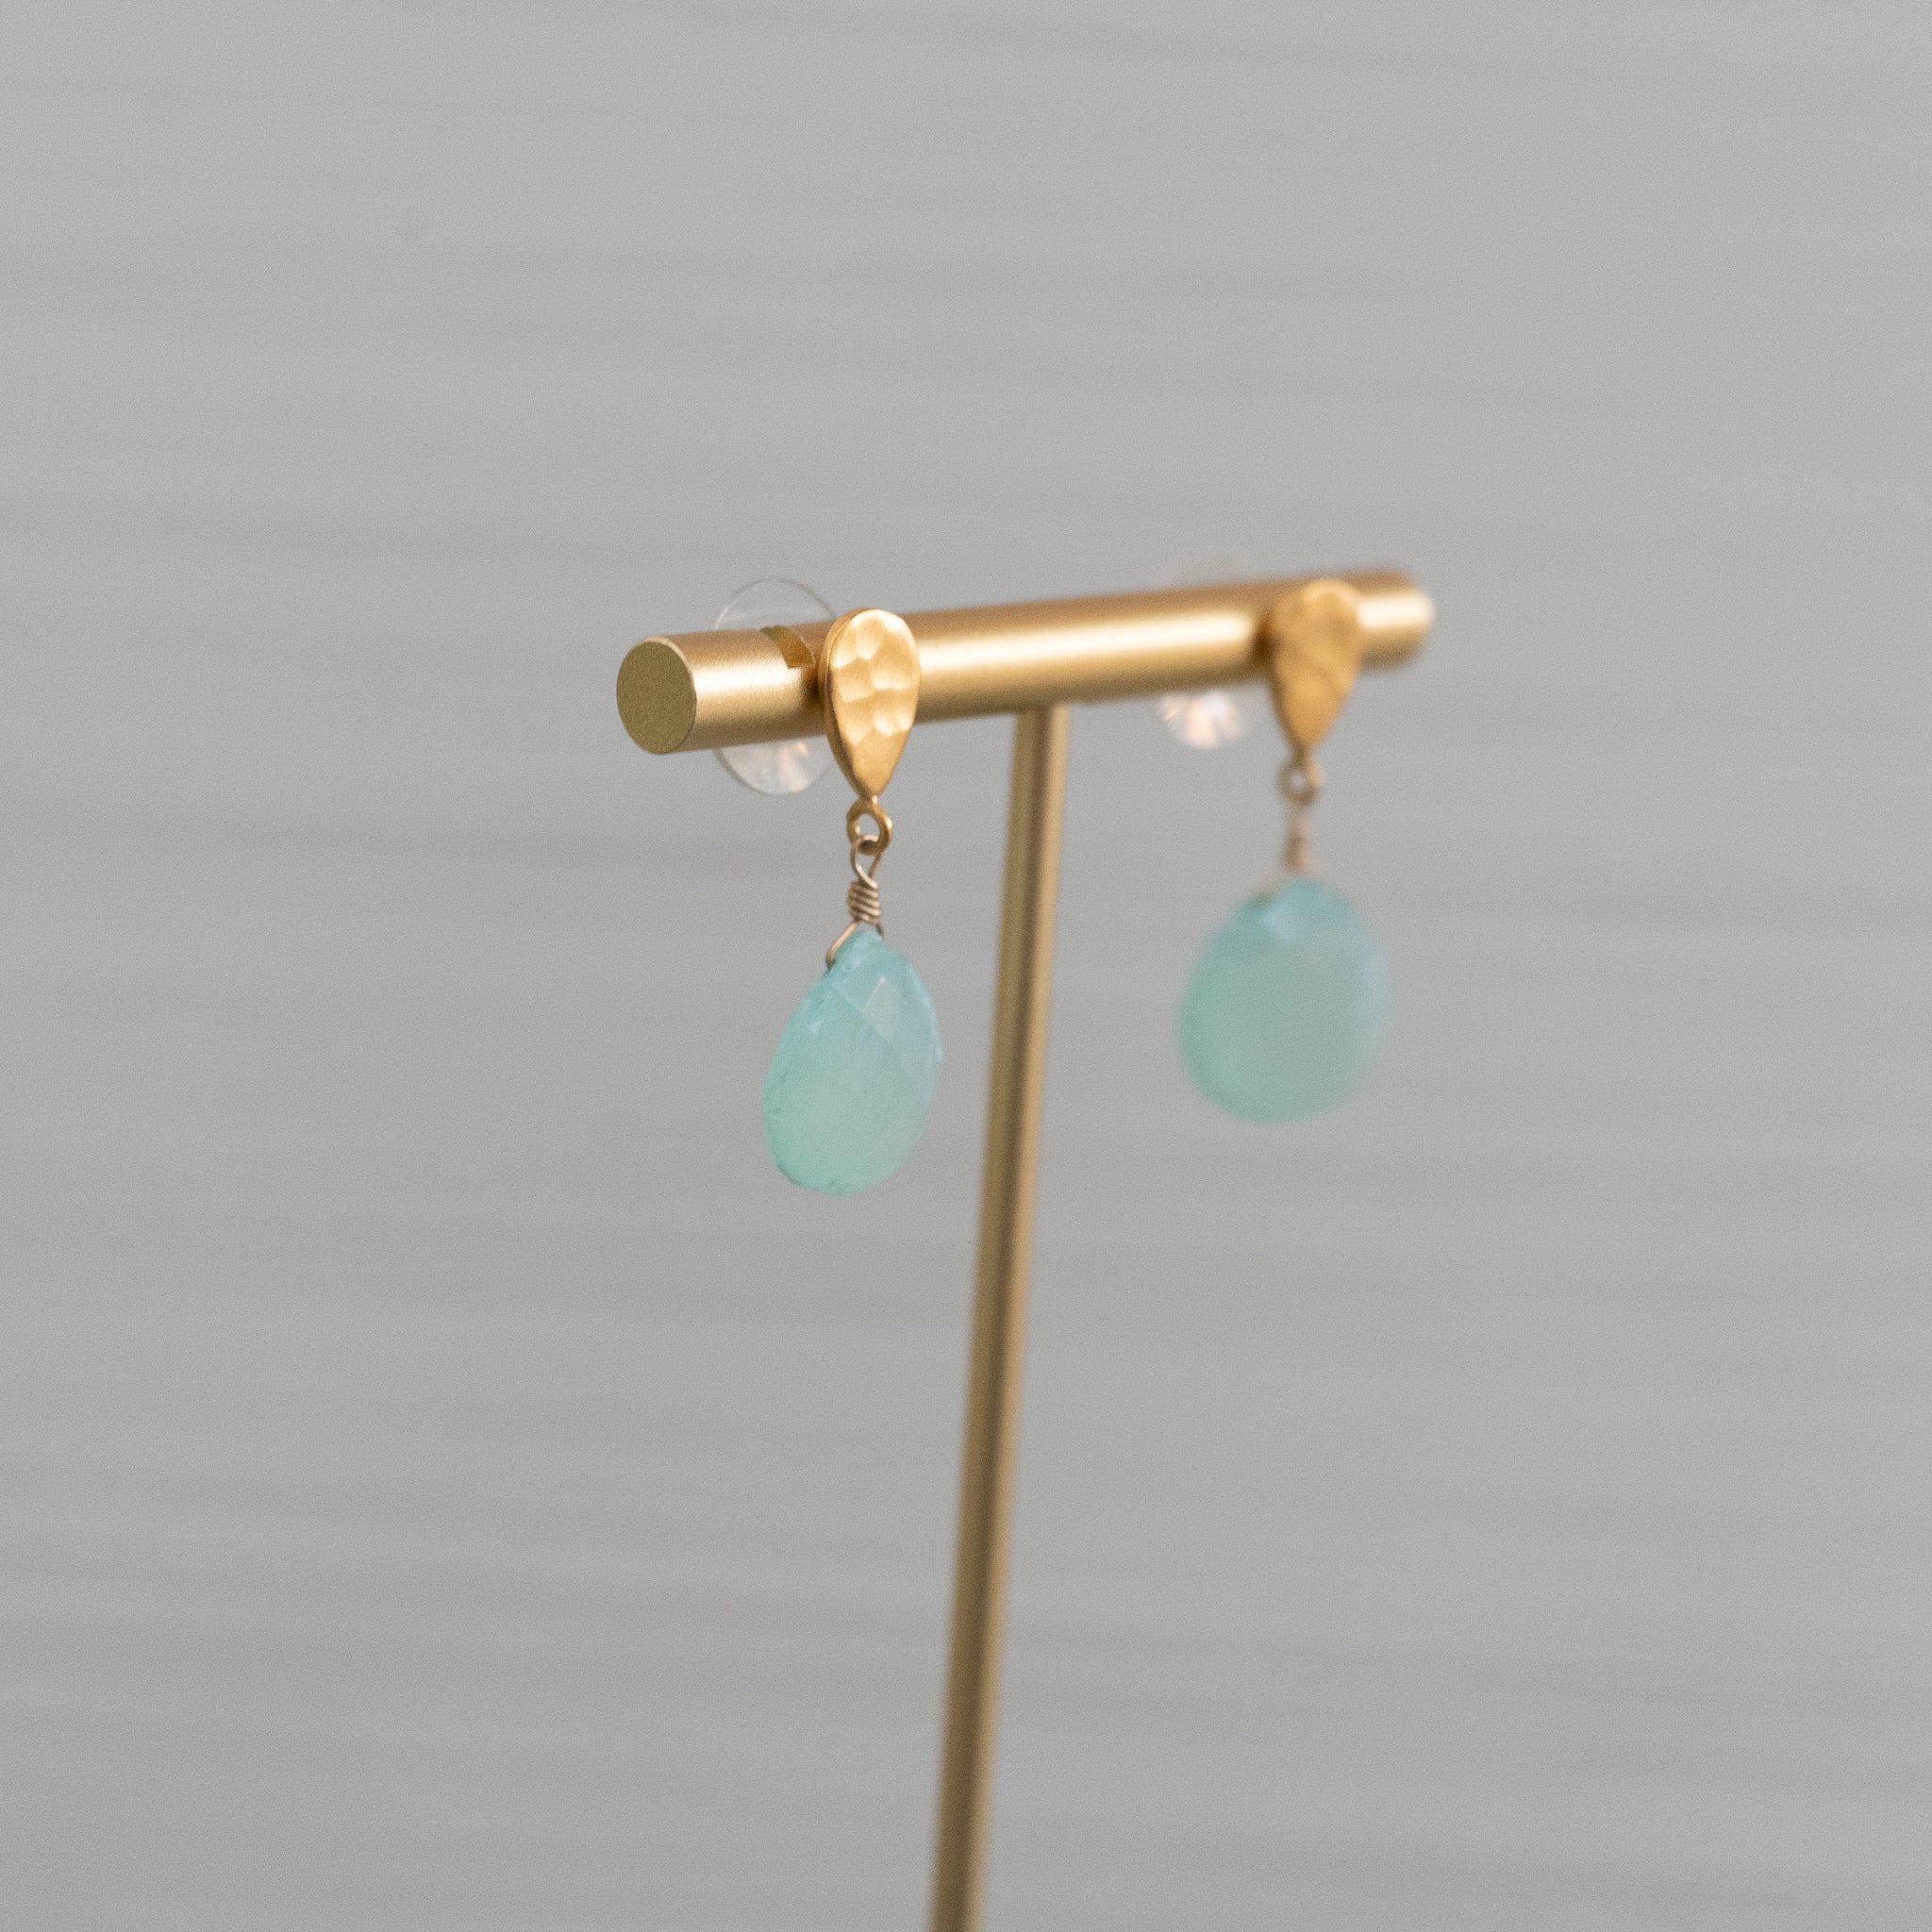 matte gold hammered stud earrings with large blue gemstones handmade in Hawaii by eve black jewelry  Edit alt text